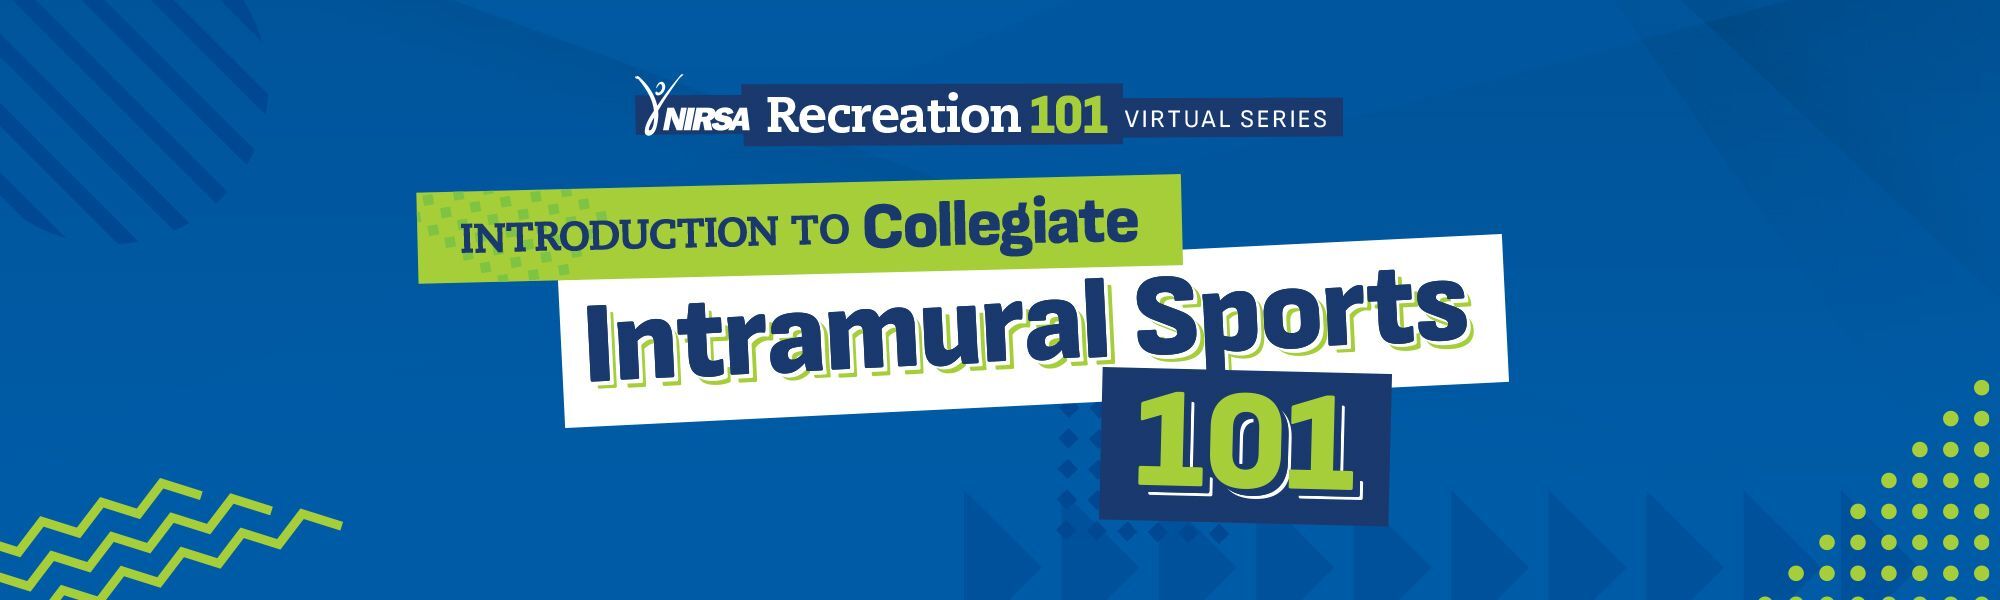 Introduction to Collegiate Intramural Sports 101